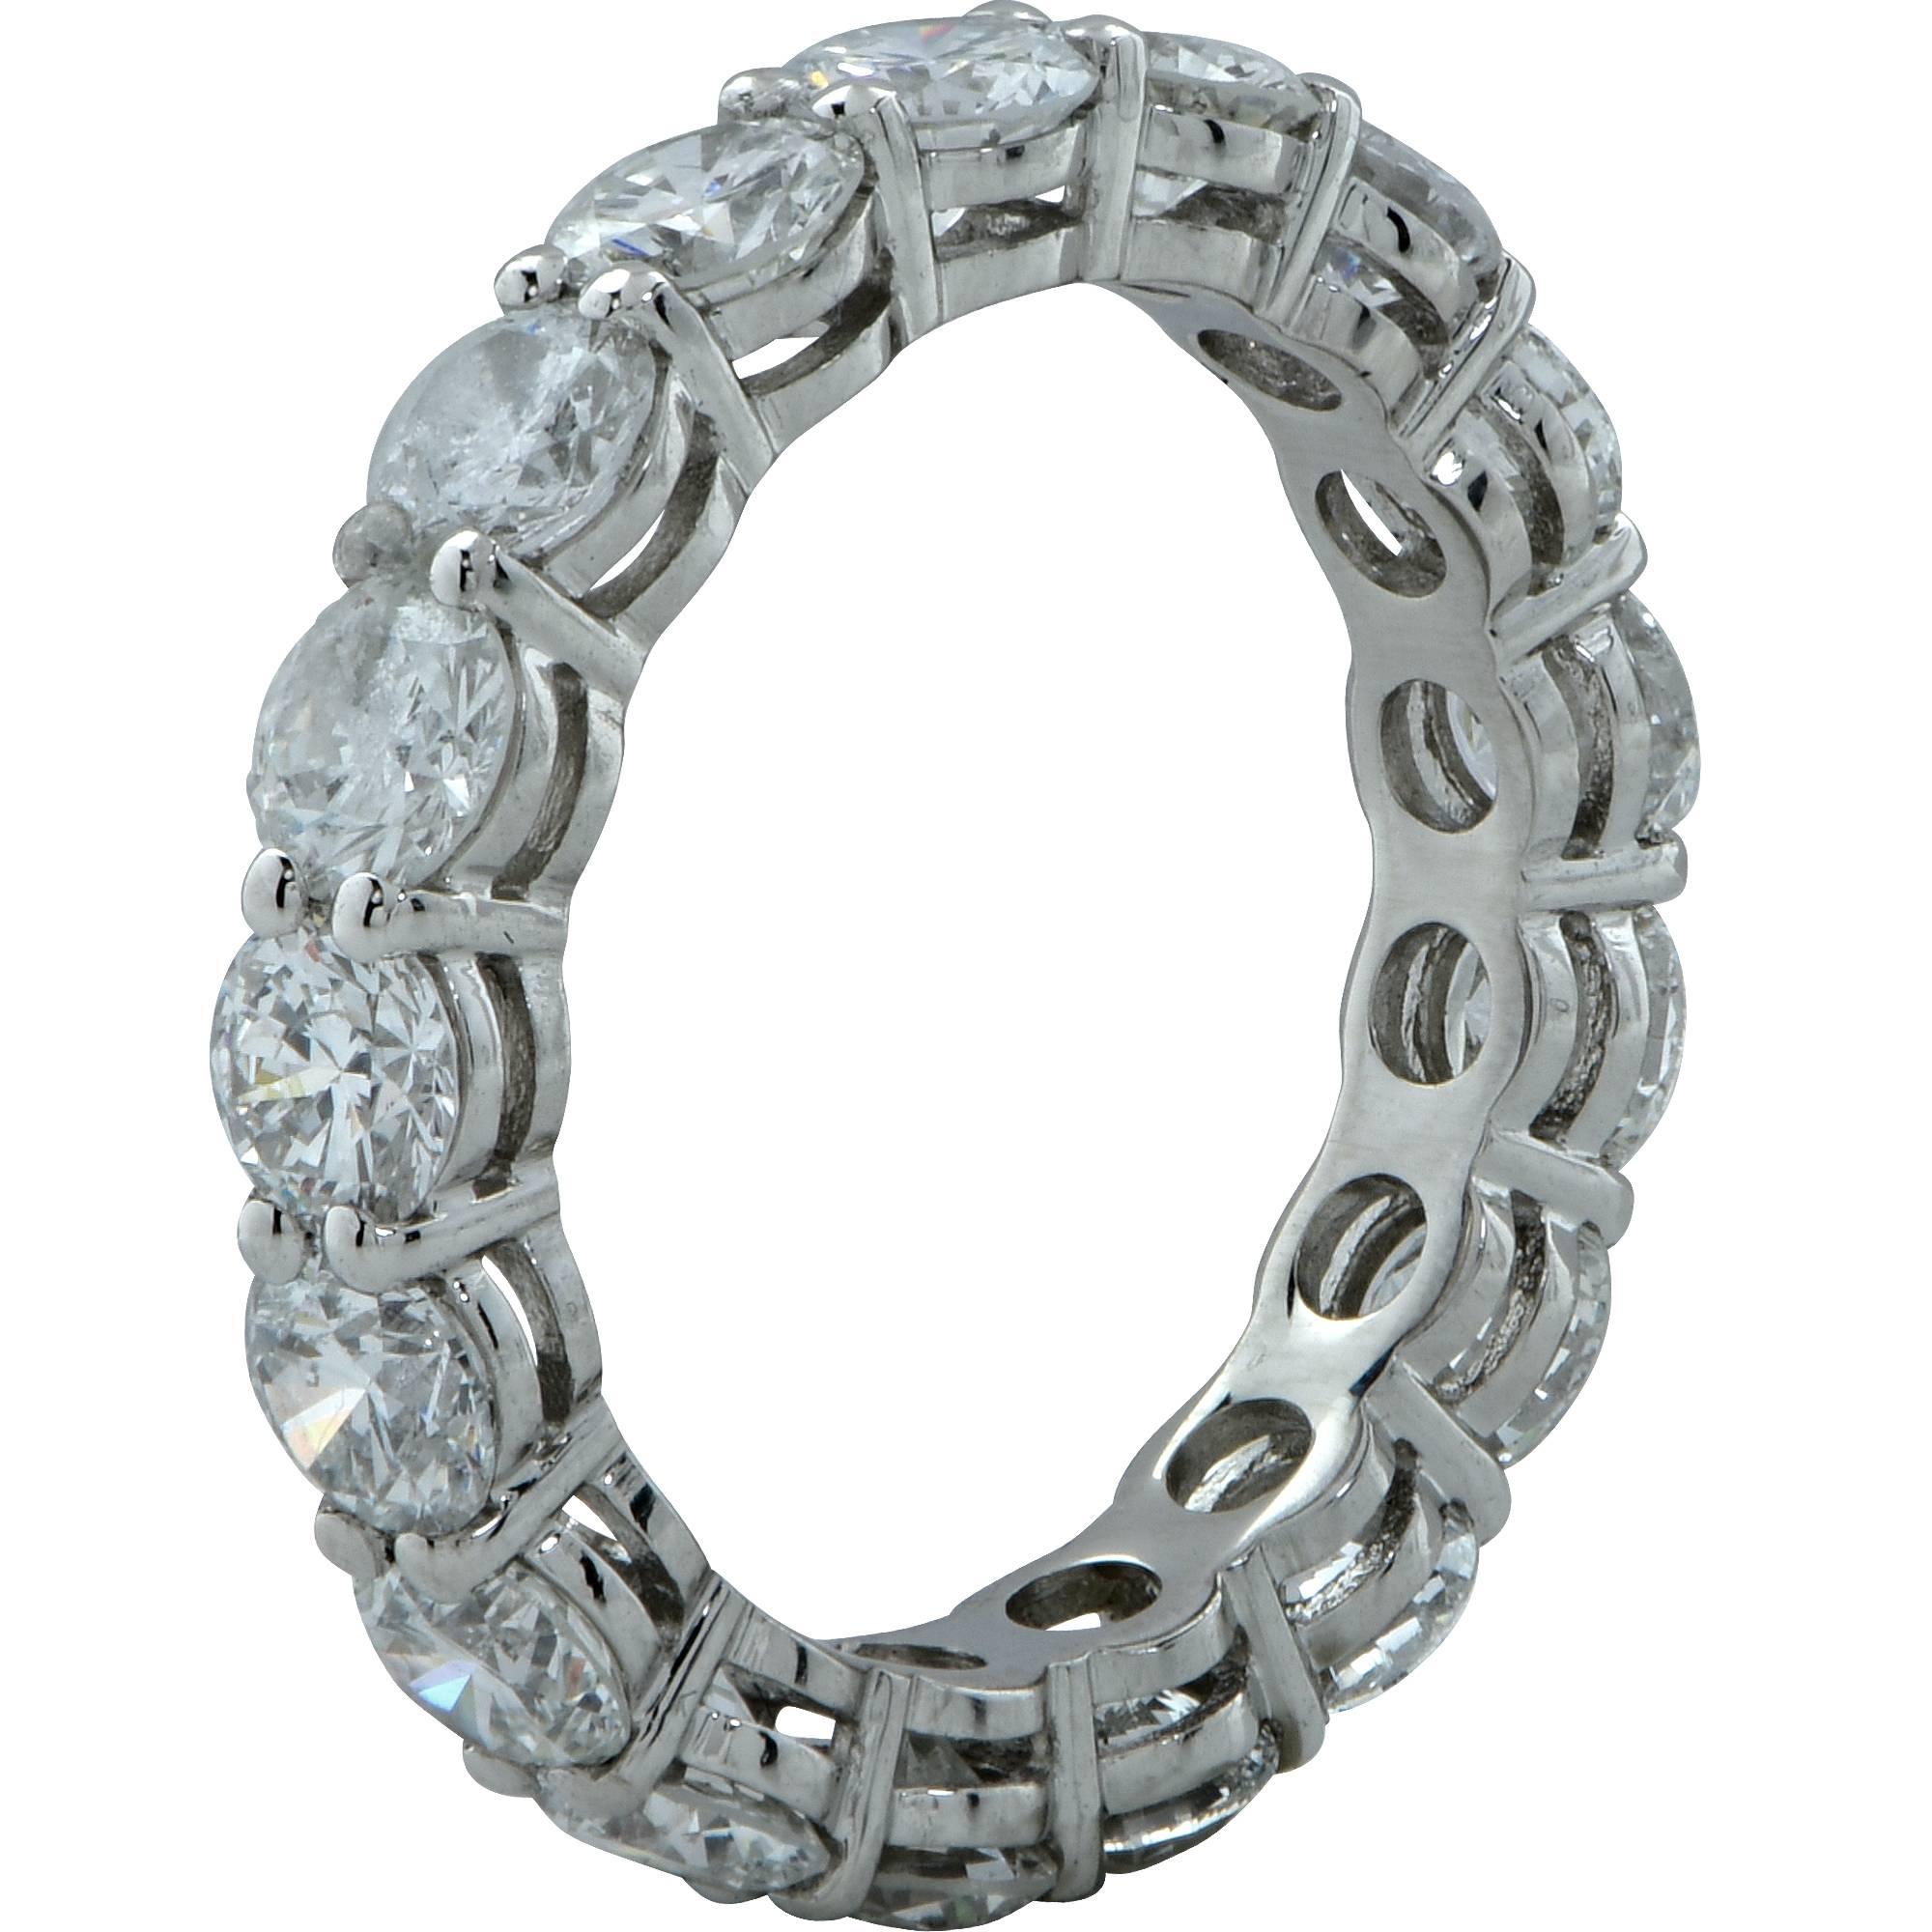 Platinum diamond wedding eternity band featuring 17 round brilliant cut diamonds weighing 4.83cts, H color and VS1-SI clarity.

The ring is a size 6.75 and can be sized up or down.
Measurements are available upon request.
It is stamped and/or tested